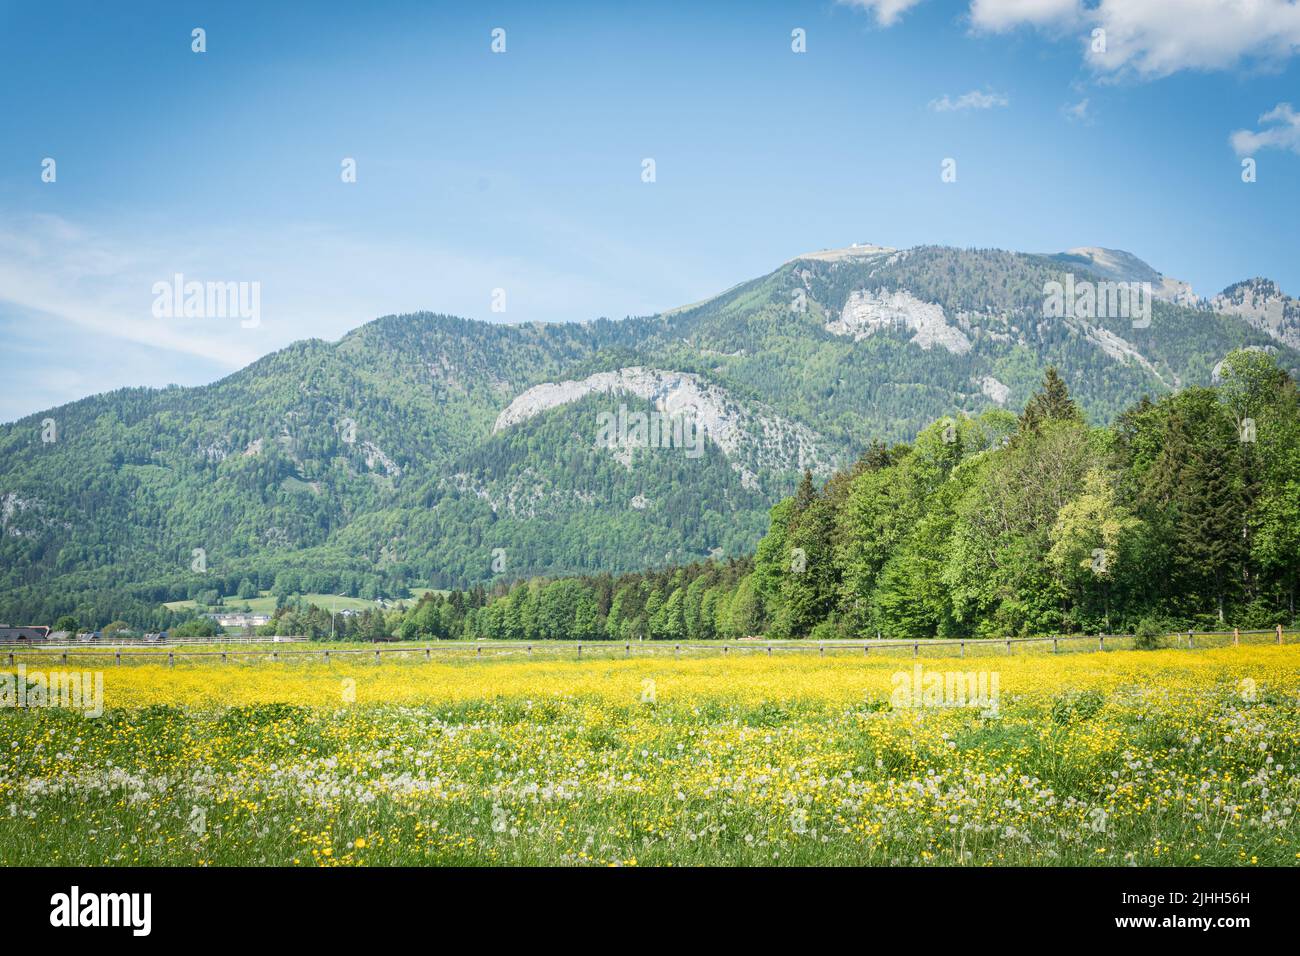 Schafberg mountain in the Salzkammergut. Famous mountain in the Austrian Alps during summer. Stock Photo